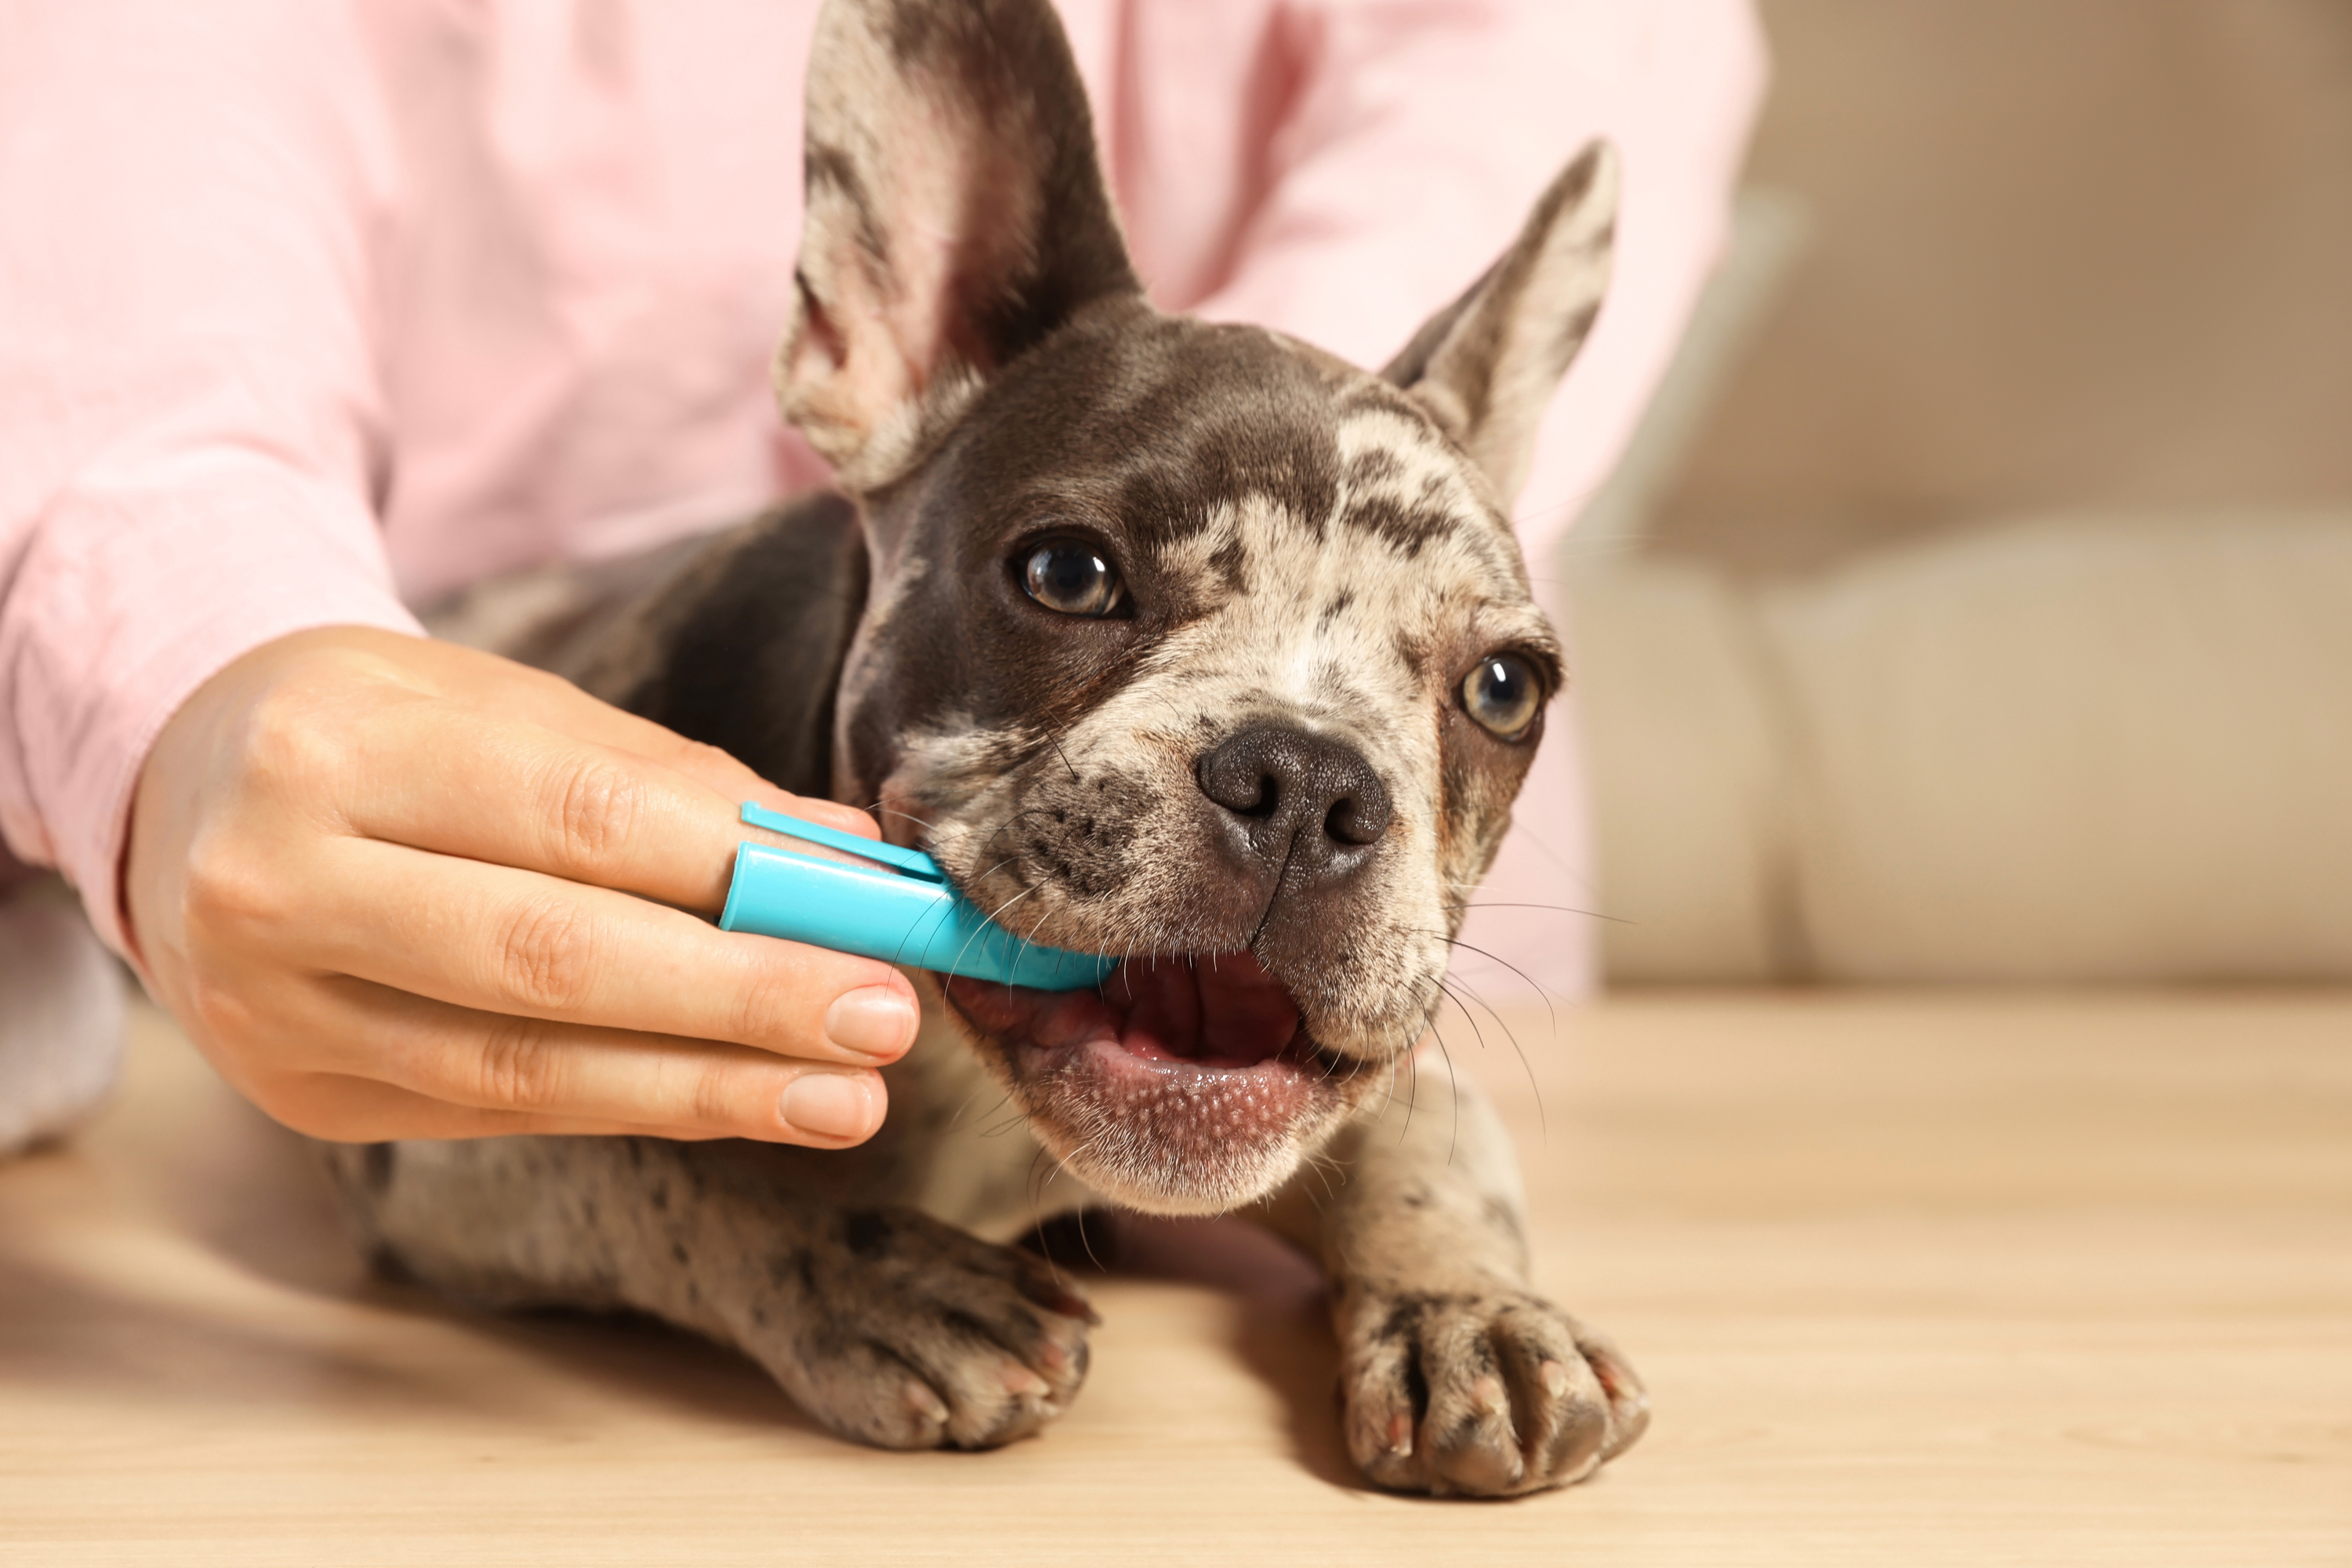 A Dog Brushing Its Teeth With A Toothbrush And Toothpaste